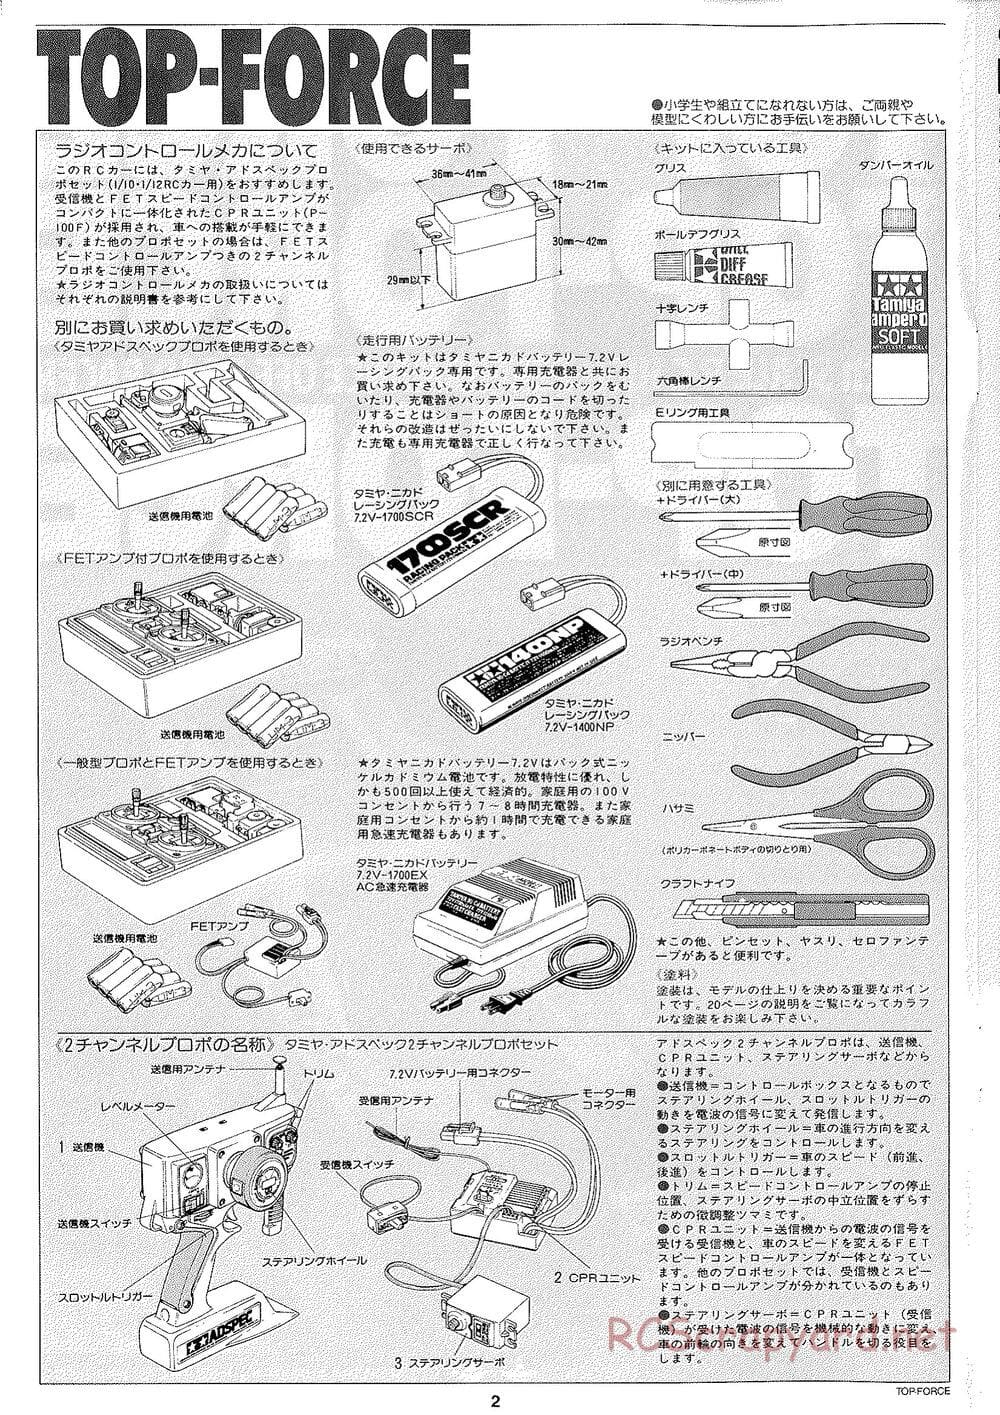 Tamiya - Top Force 2005 - DF-01 Chassis - Manual - Page 2